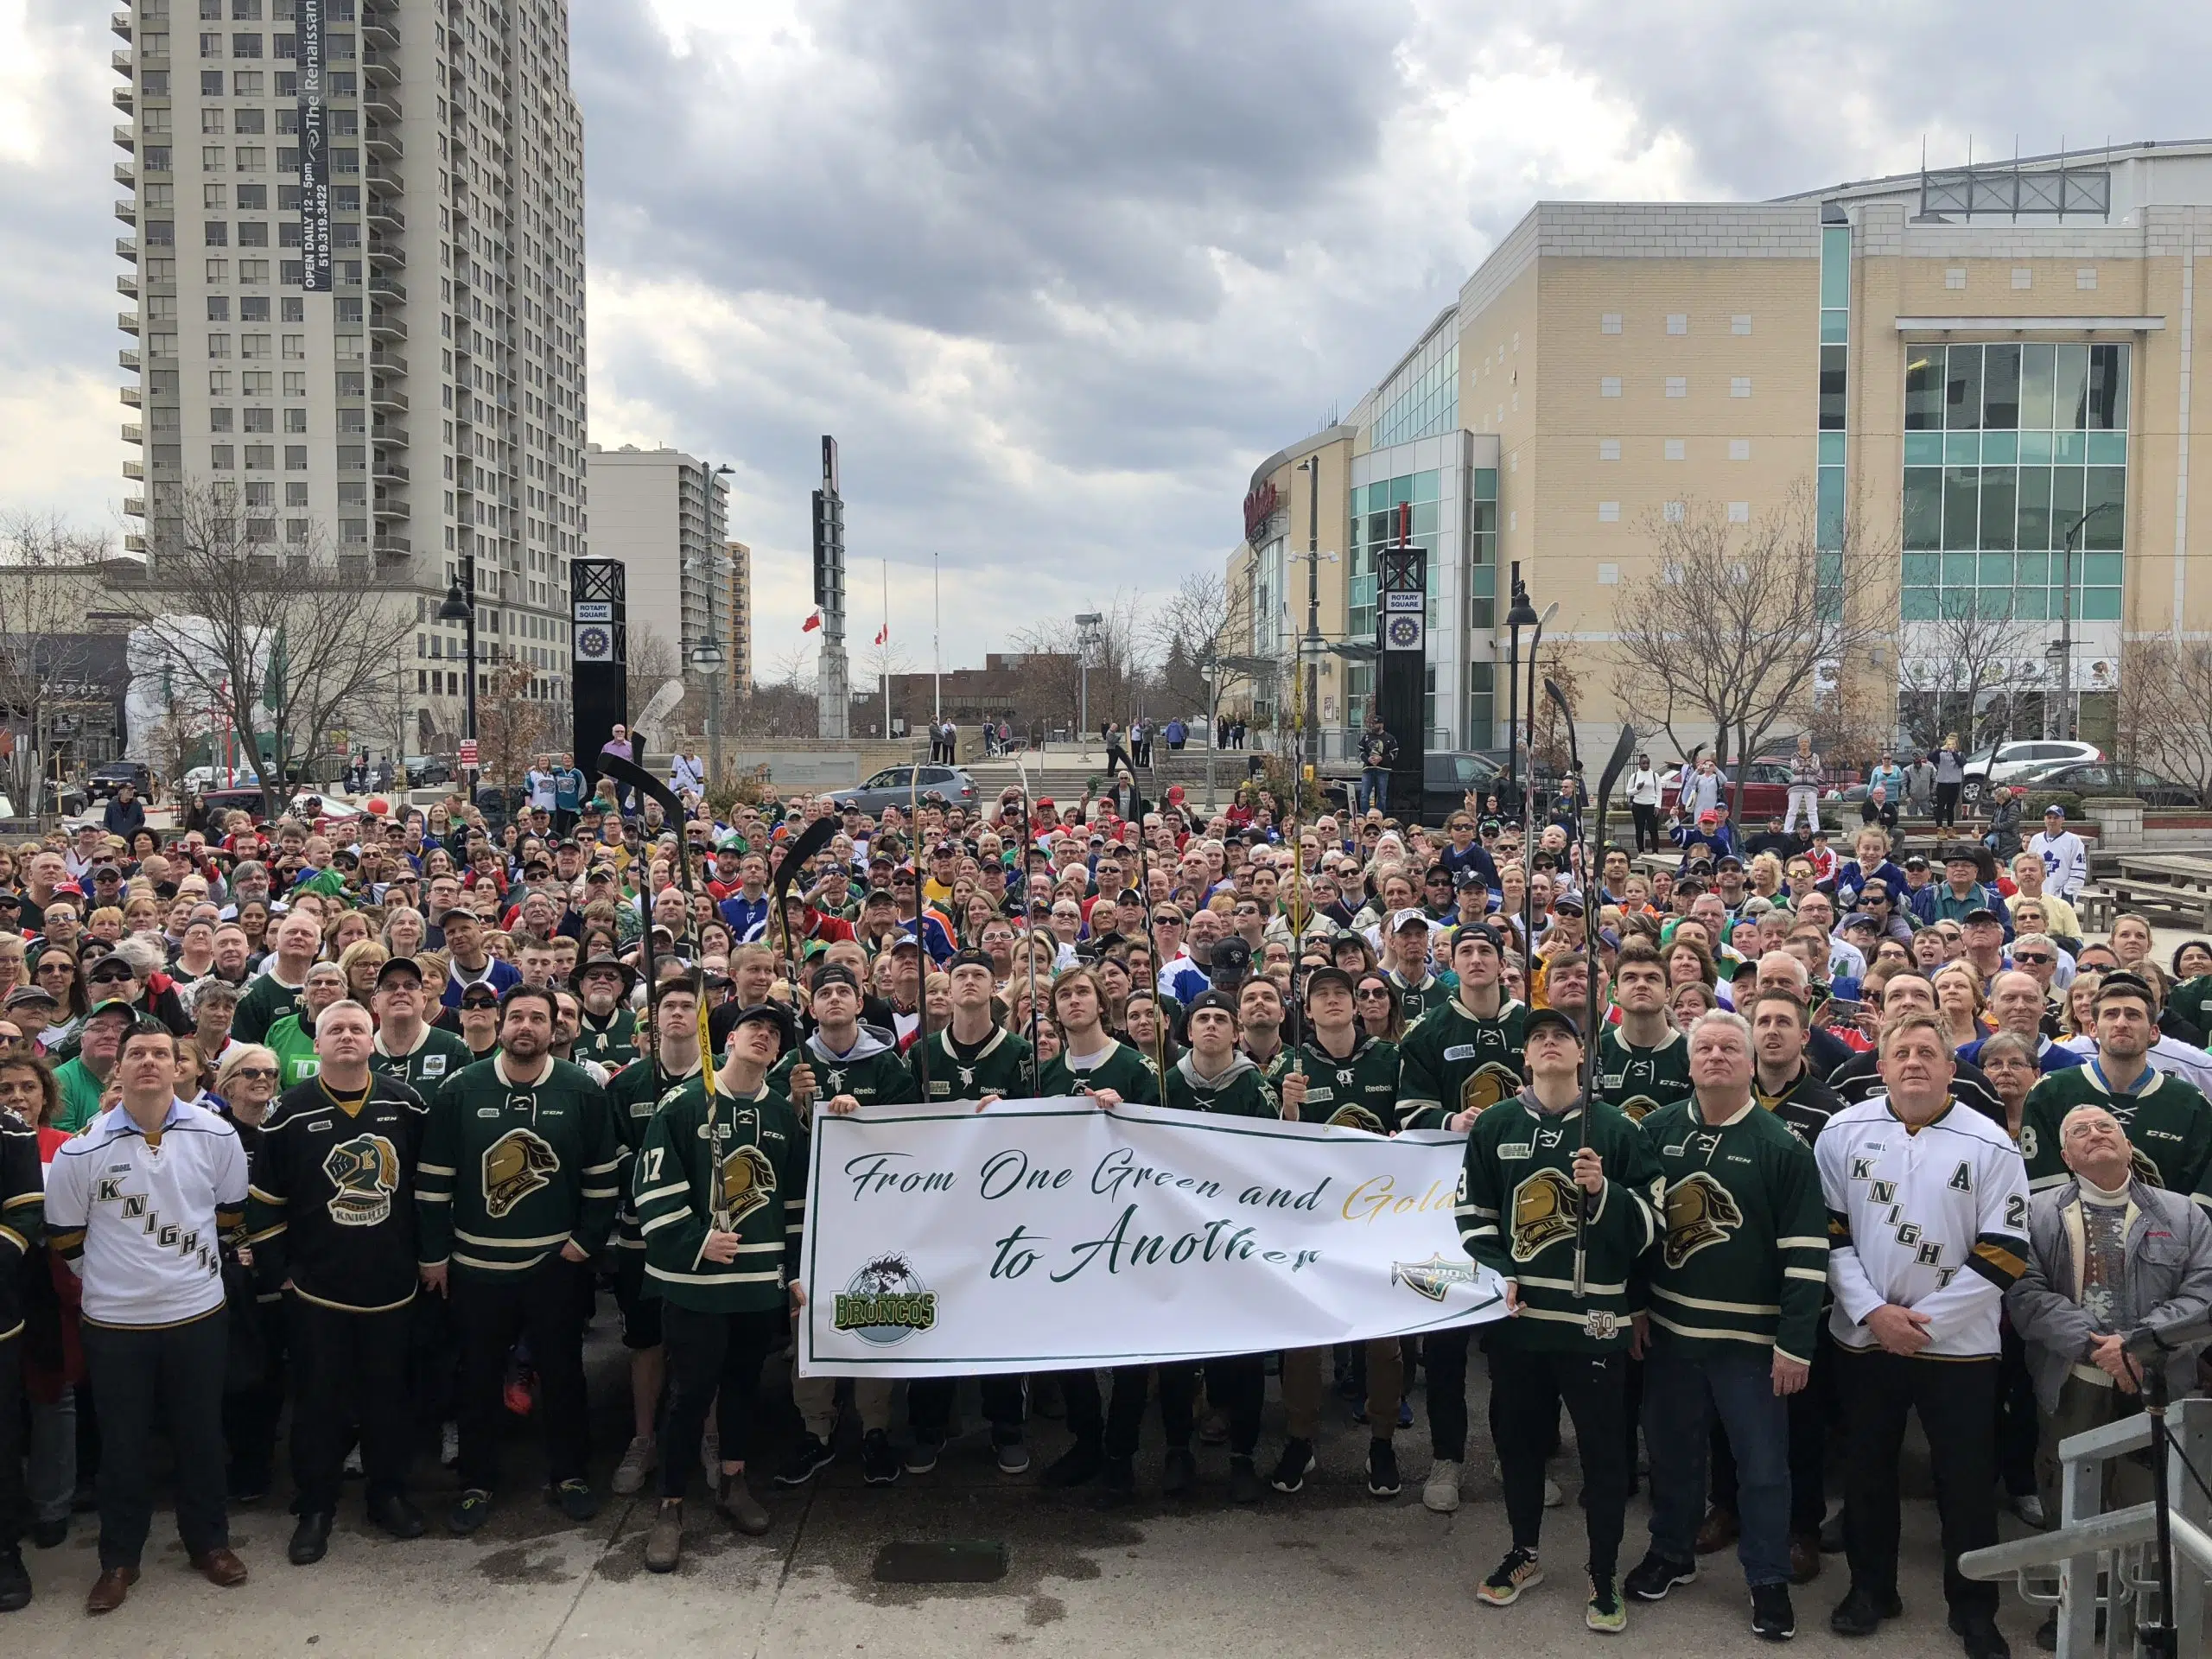 City of London shows solidarity to the victims of the Humboldt Broncos Tragedy